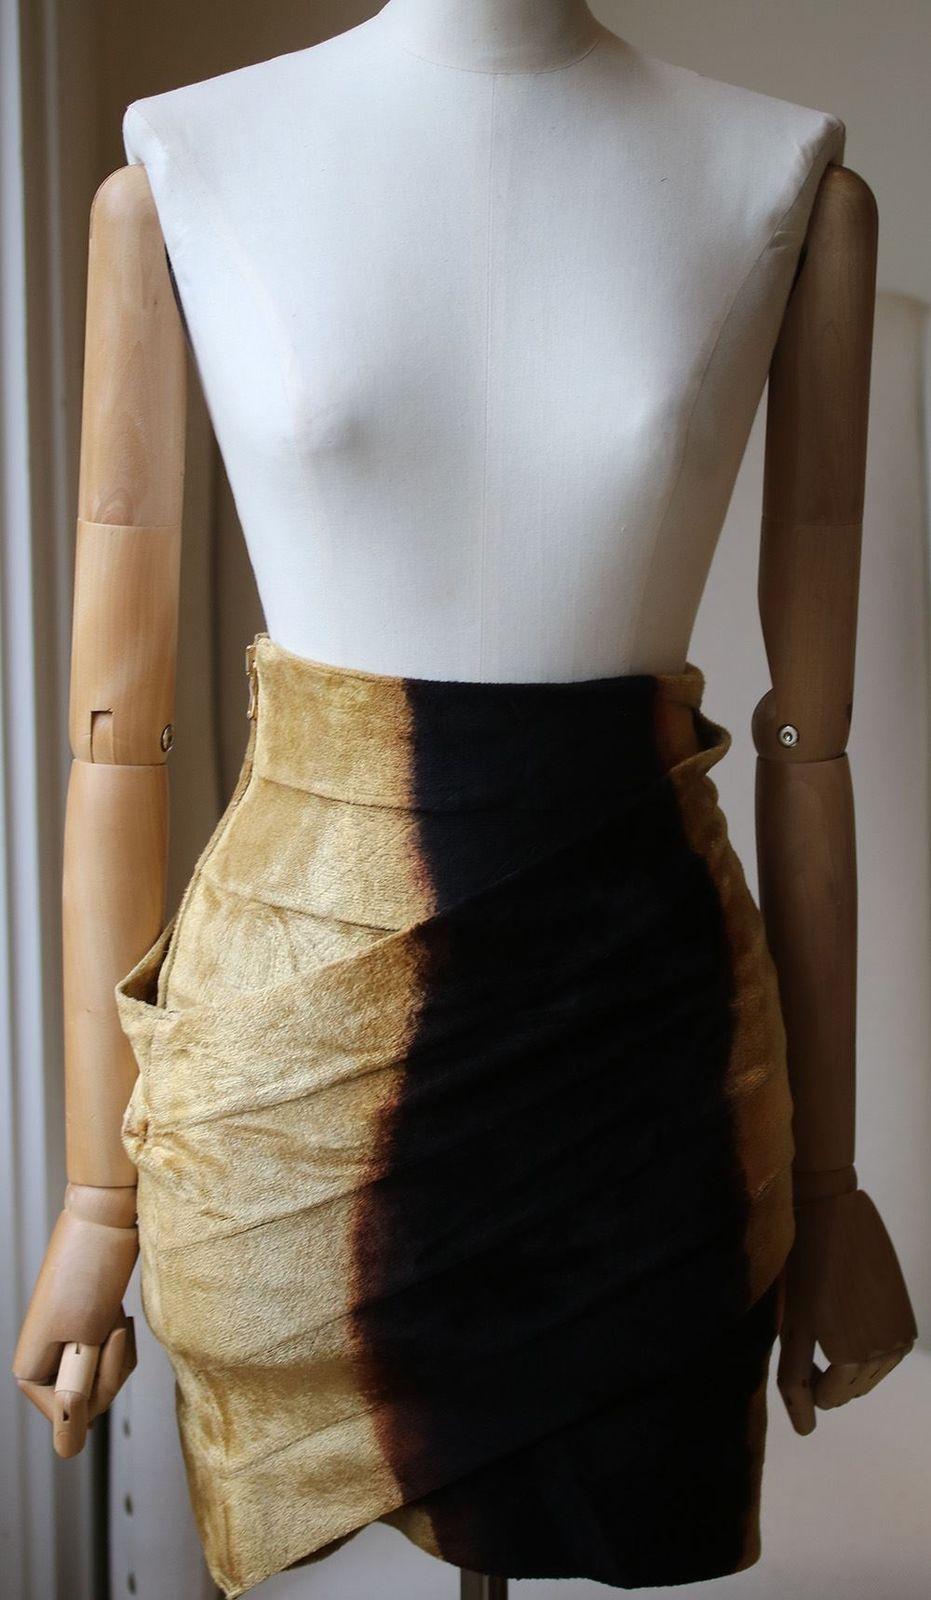 Glamorous bodycon mini skirt in an alluring colorway. Exposed goldtone back zip closure. Contrast hip panels. About 20